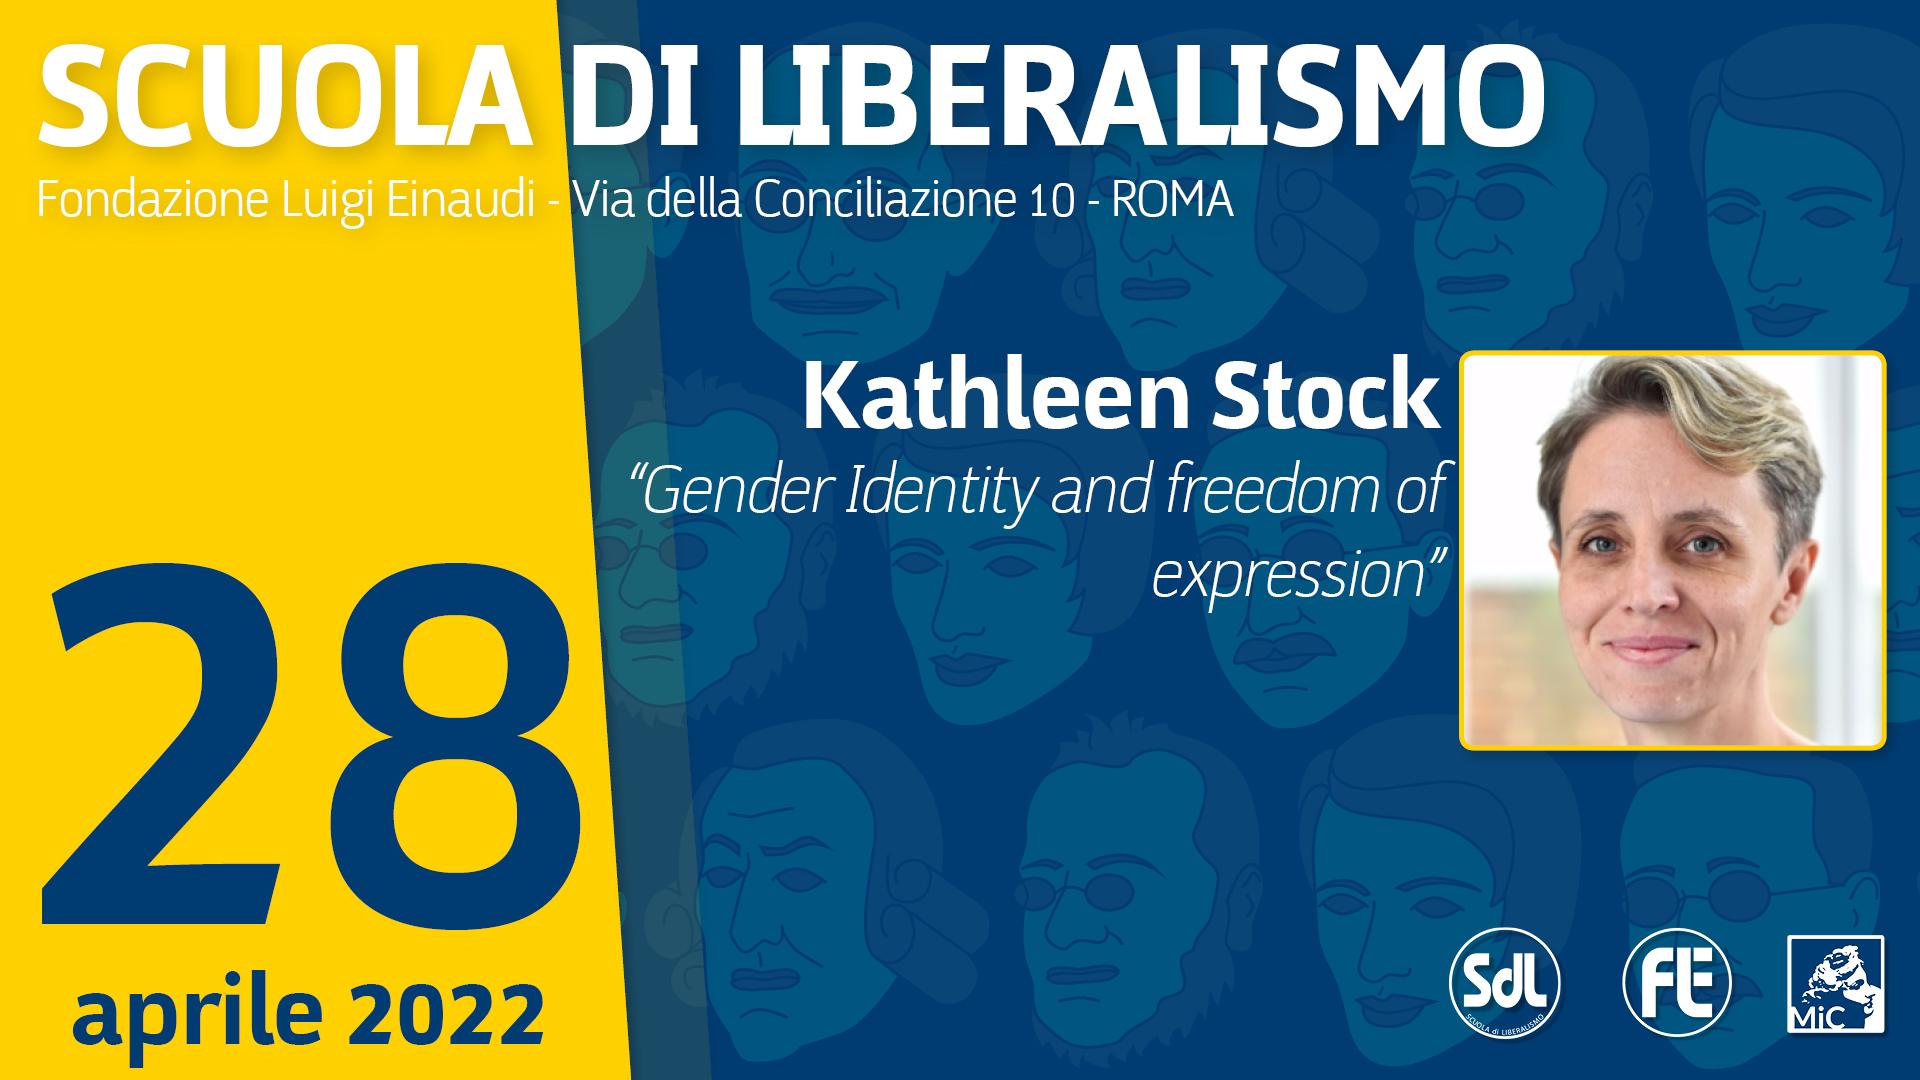 Scuola di Liberalismo 2022 – Kathleen Stock “Gender Identity and freedom of expression”